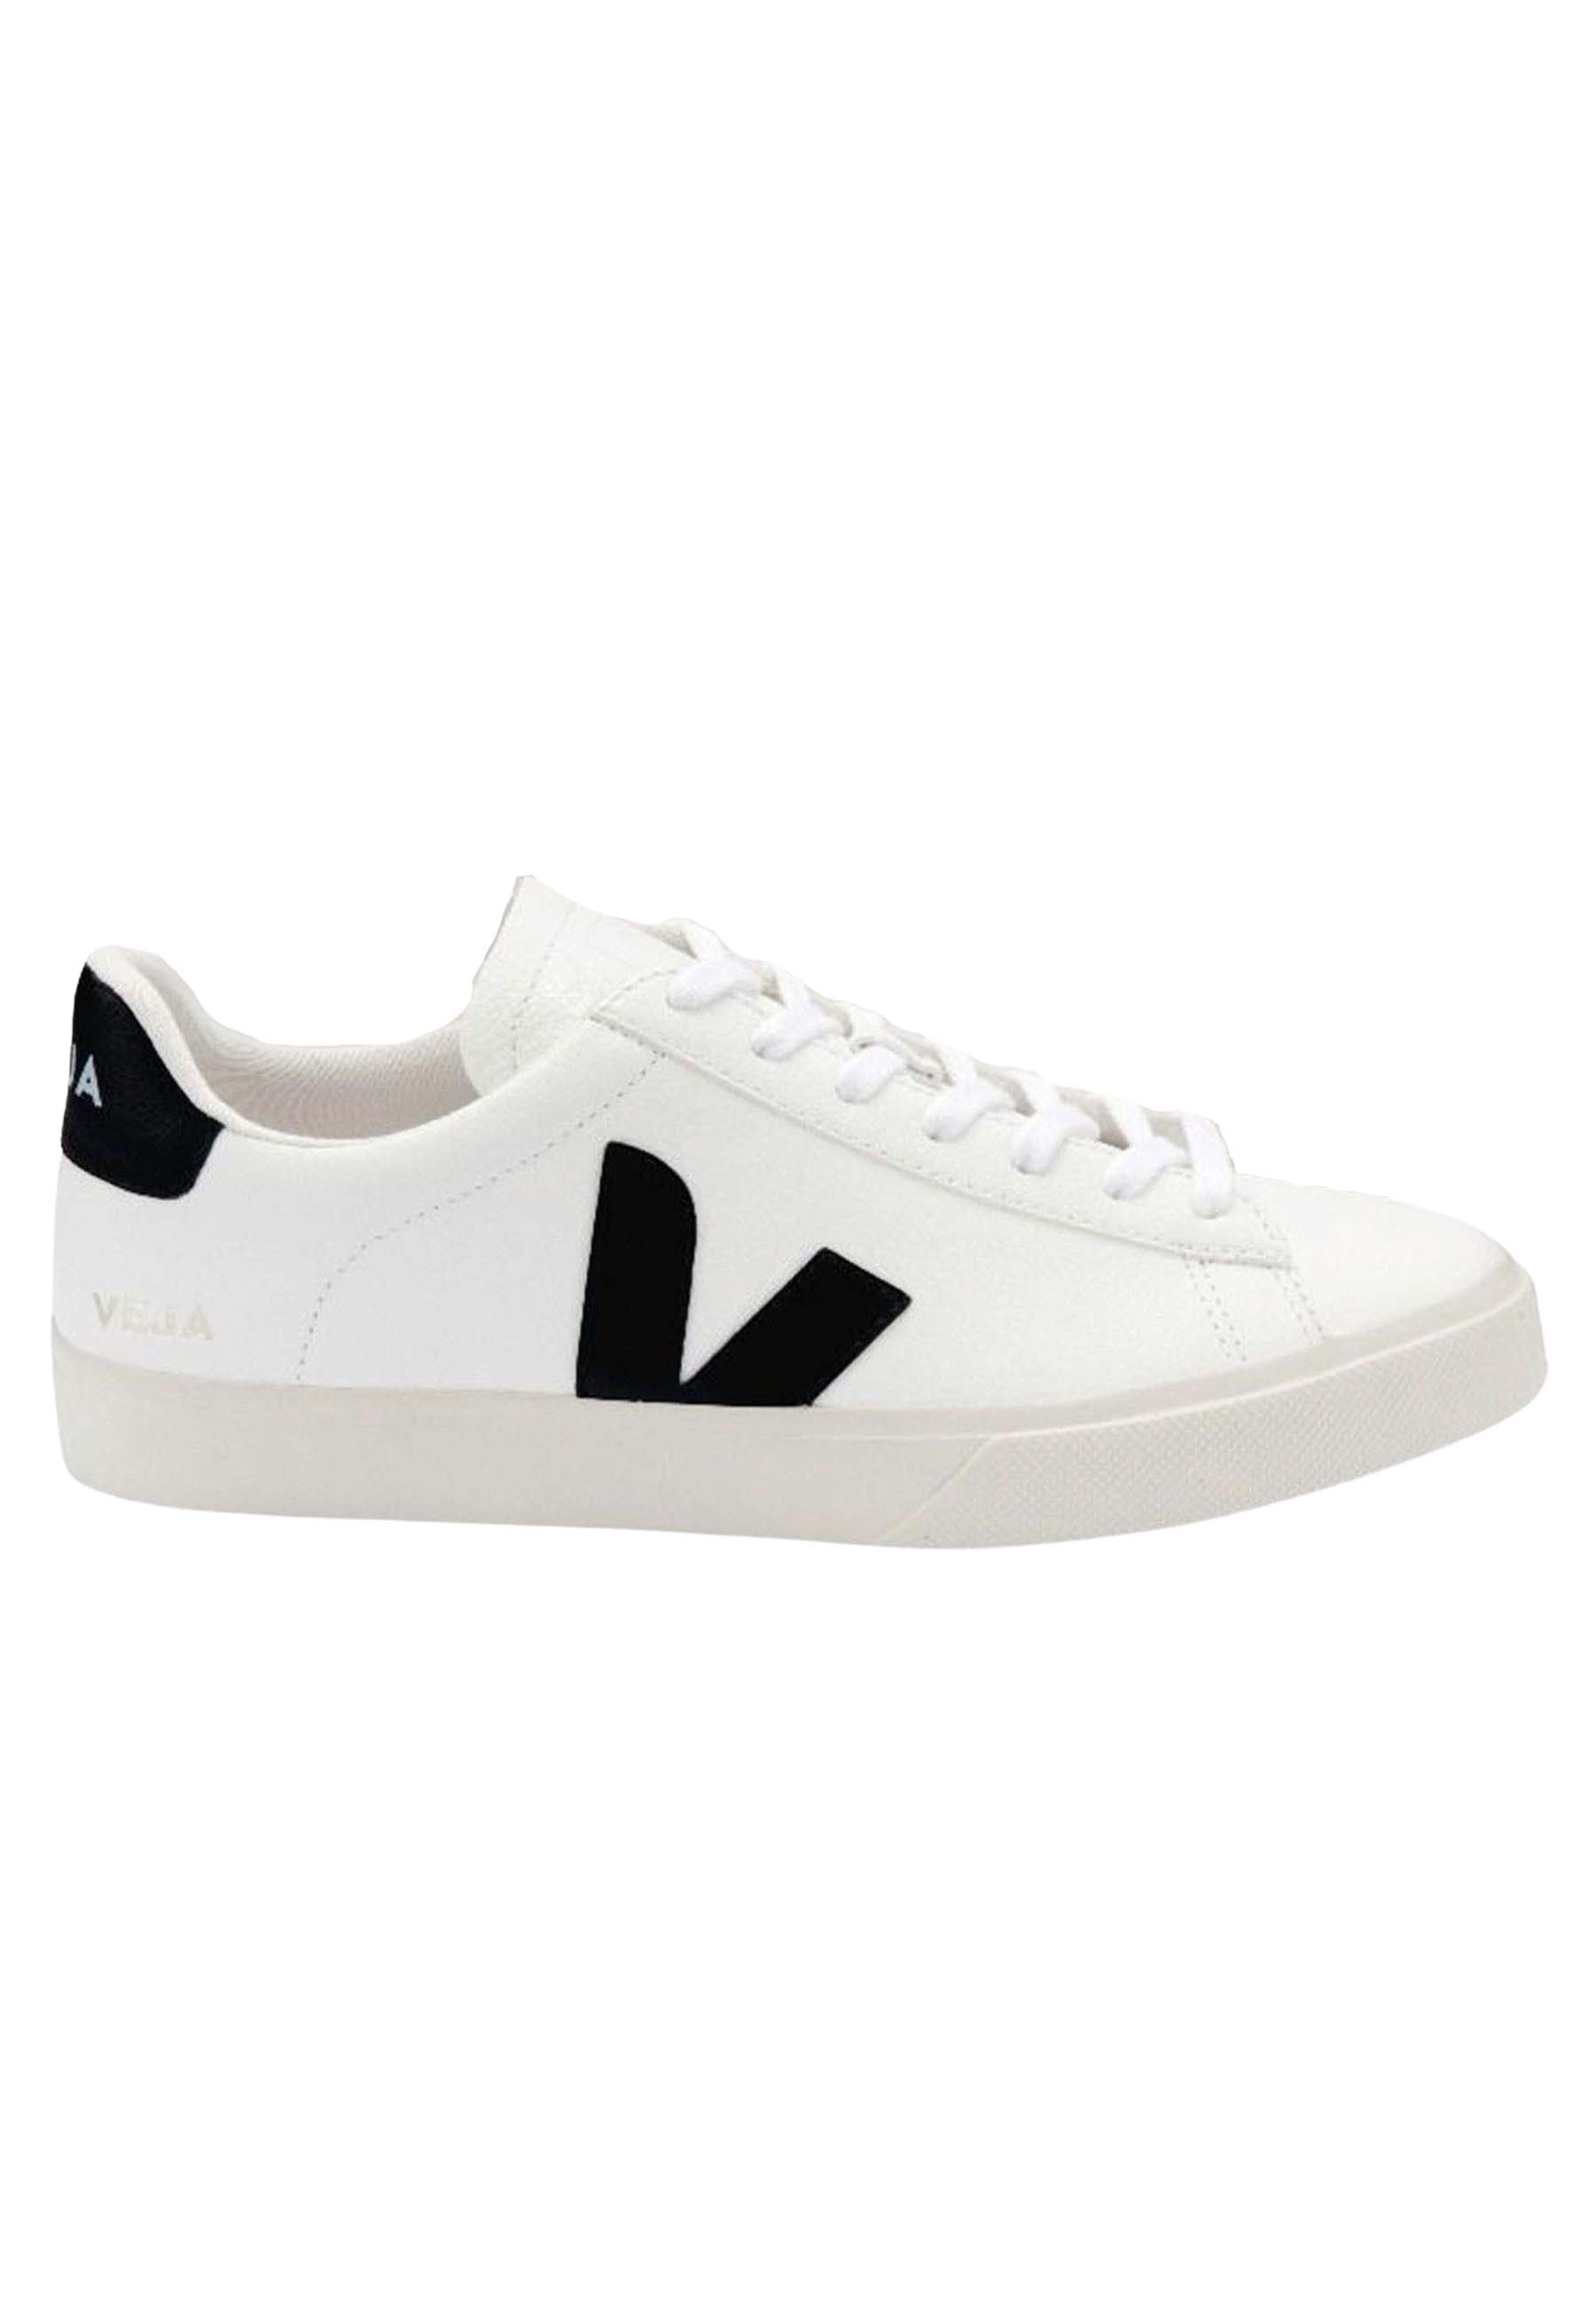 VEJA Campo Chromefree Leather - Dames Sneakers Schoenen Leer Wit CP0501537A - Maat EU 37 US 6